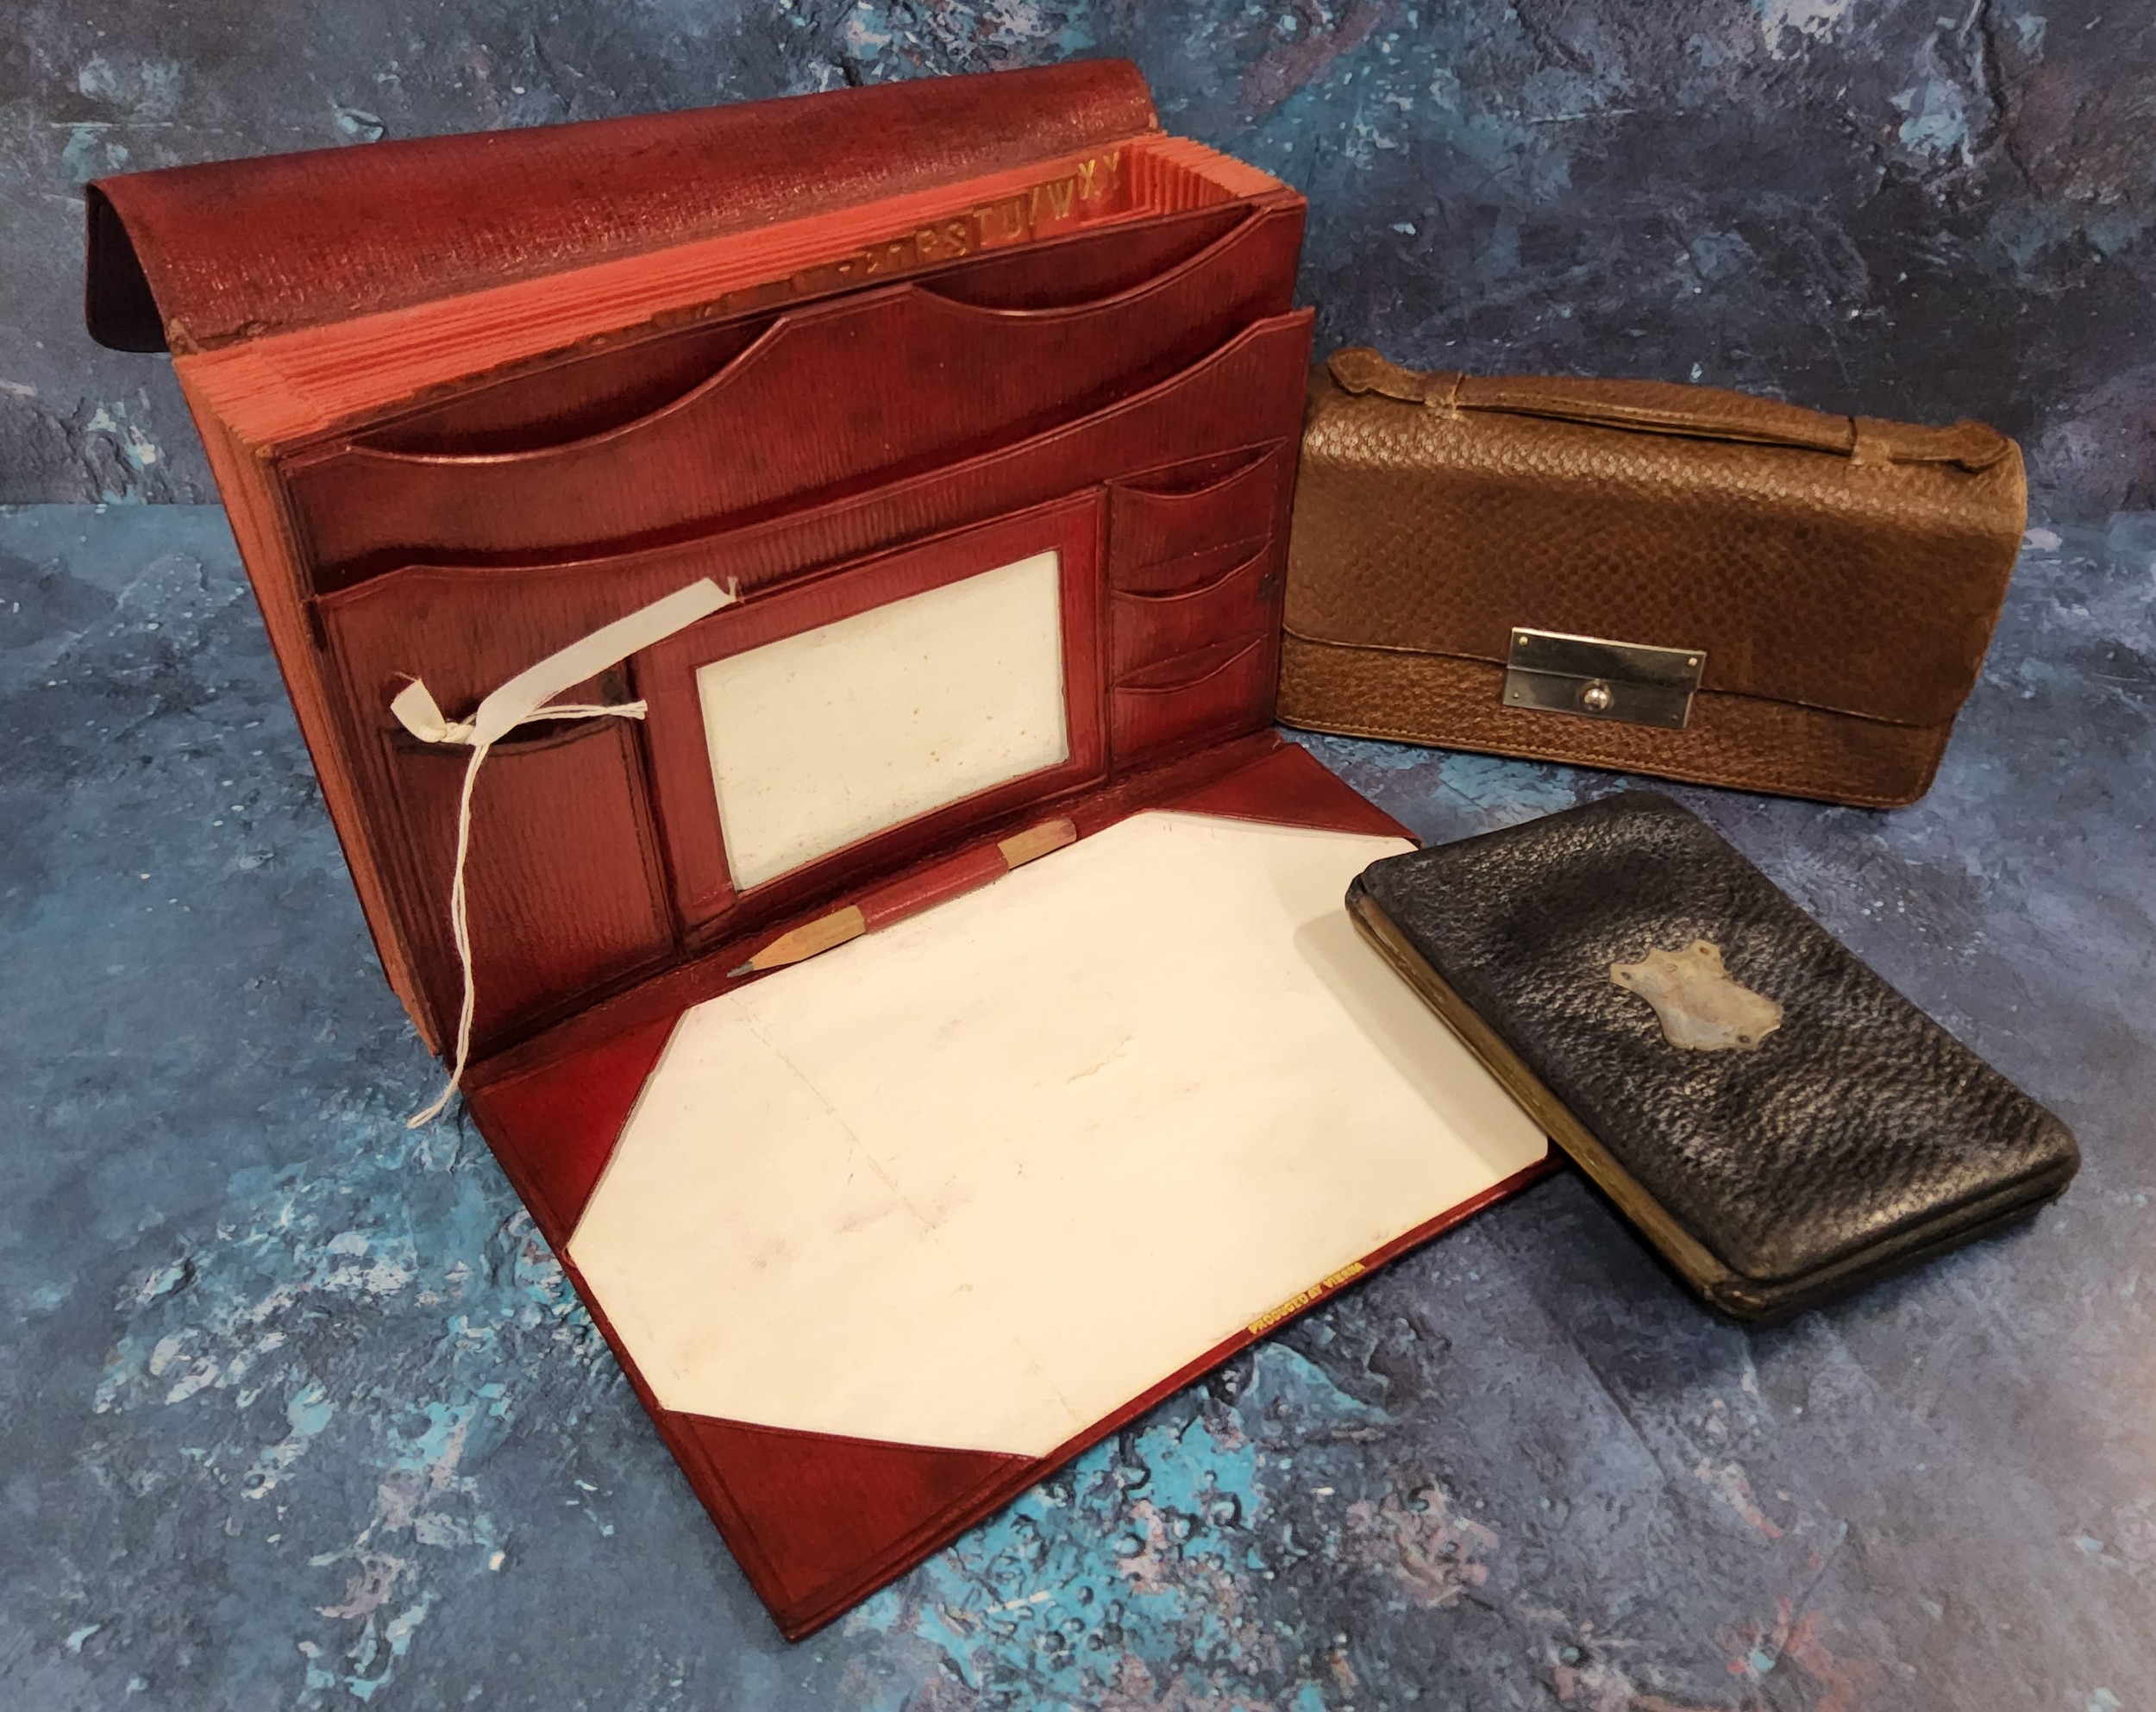 An early 20th century red morocco leather stationery case,  writing surface, stamp and paper pouches - Image 4 of 4